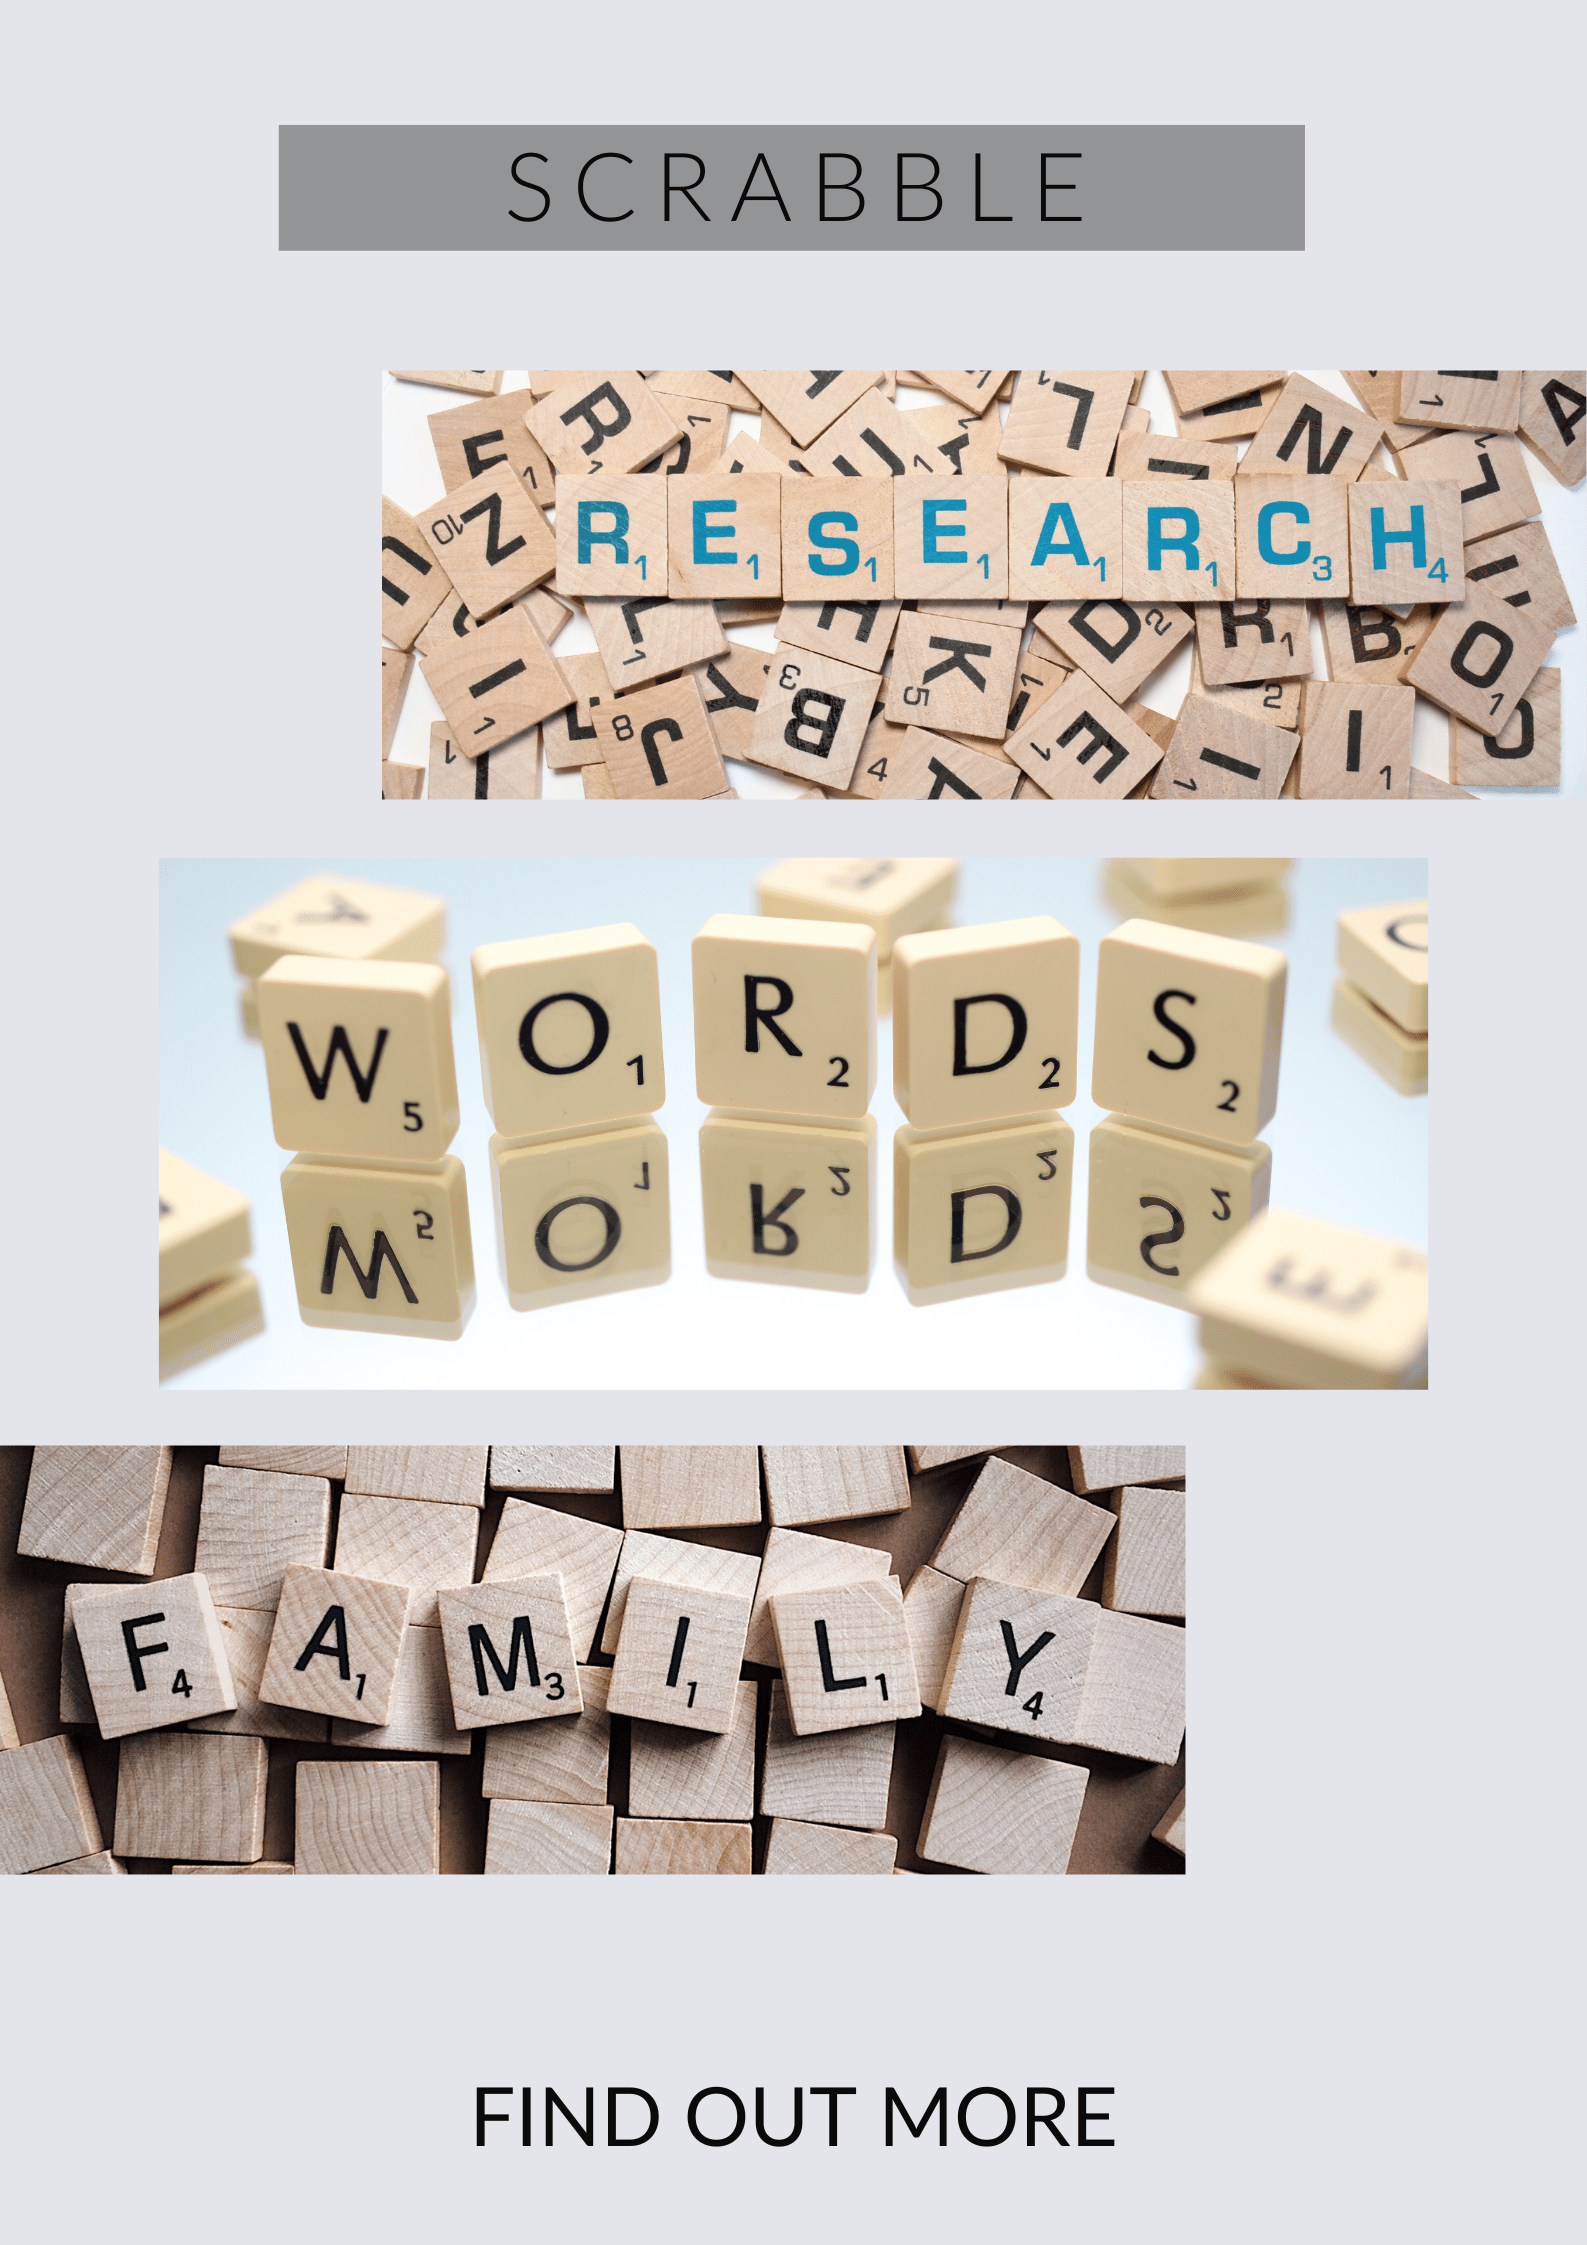 Comprehensive overview of Scrabble game rules, including tile distribution, word placement, scoring, and game-ending conditions.